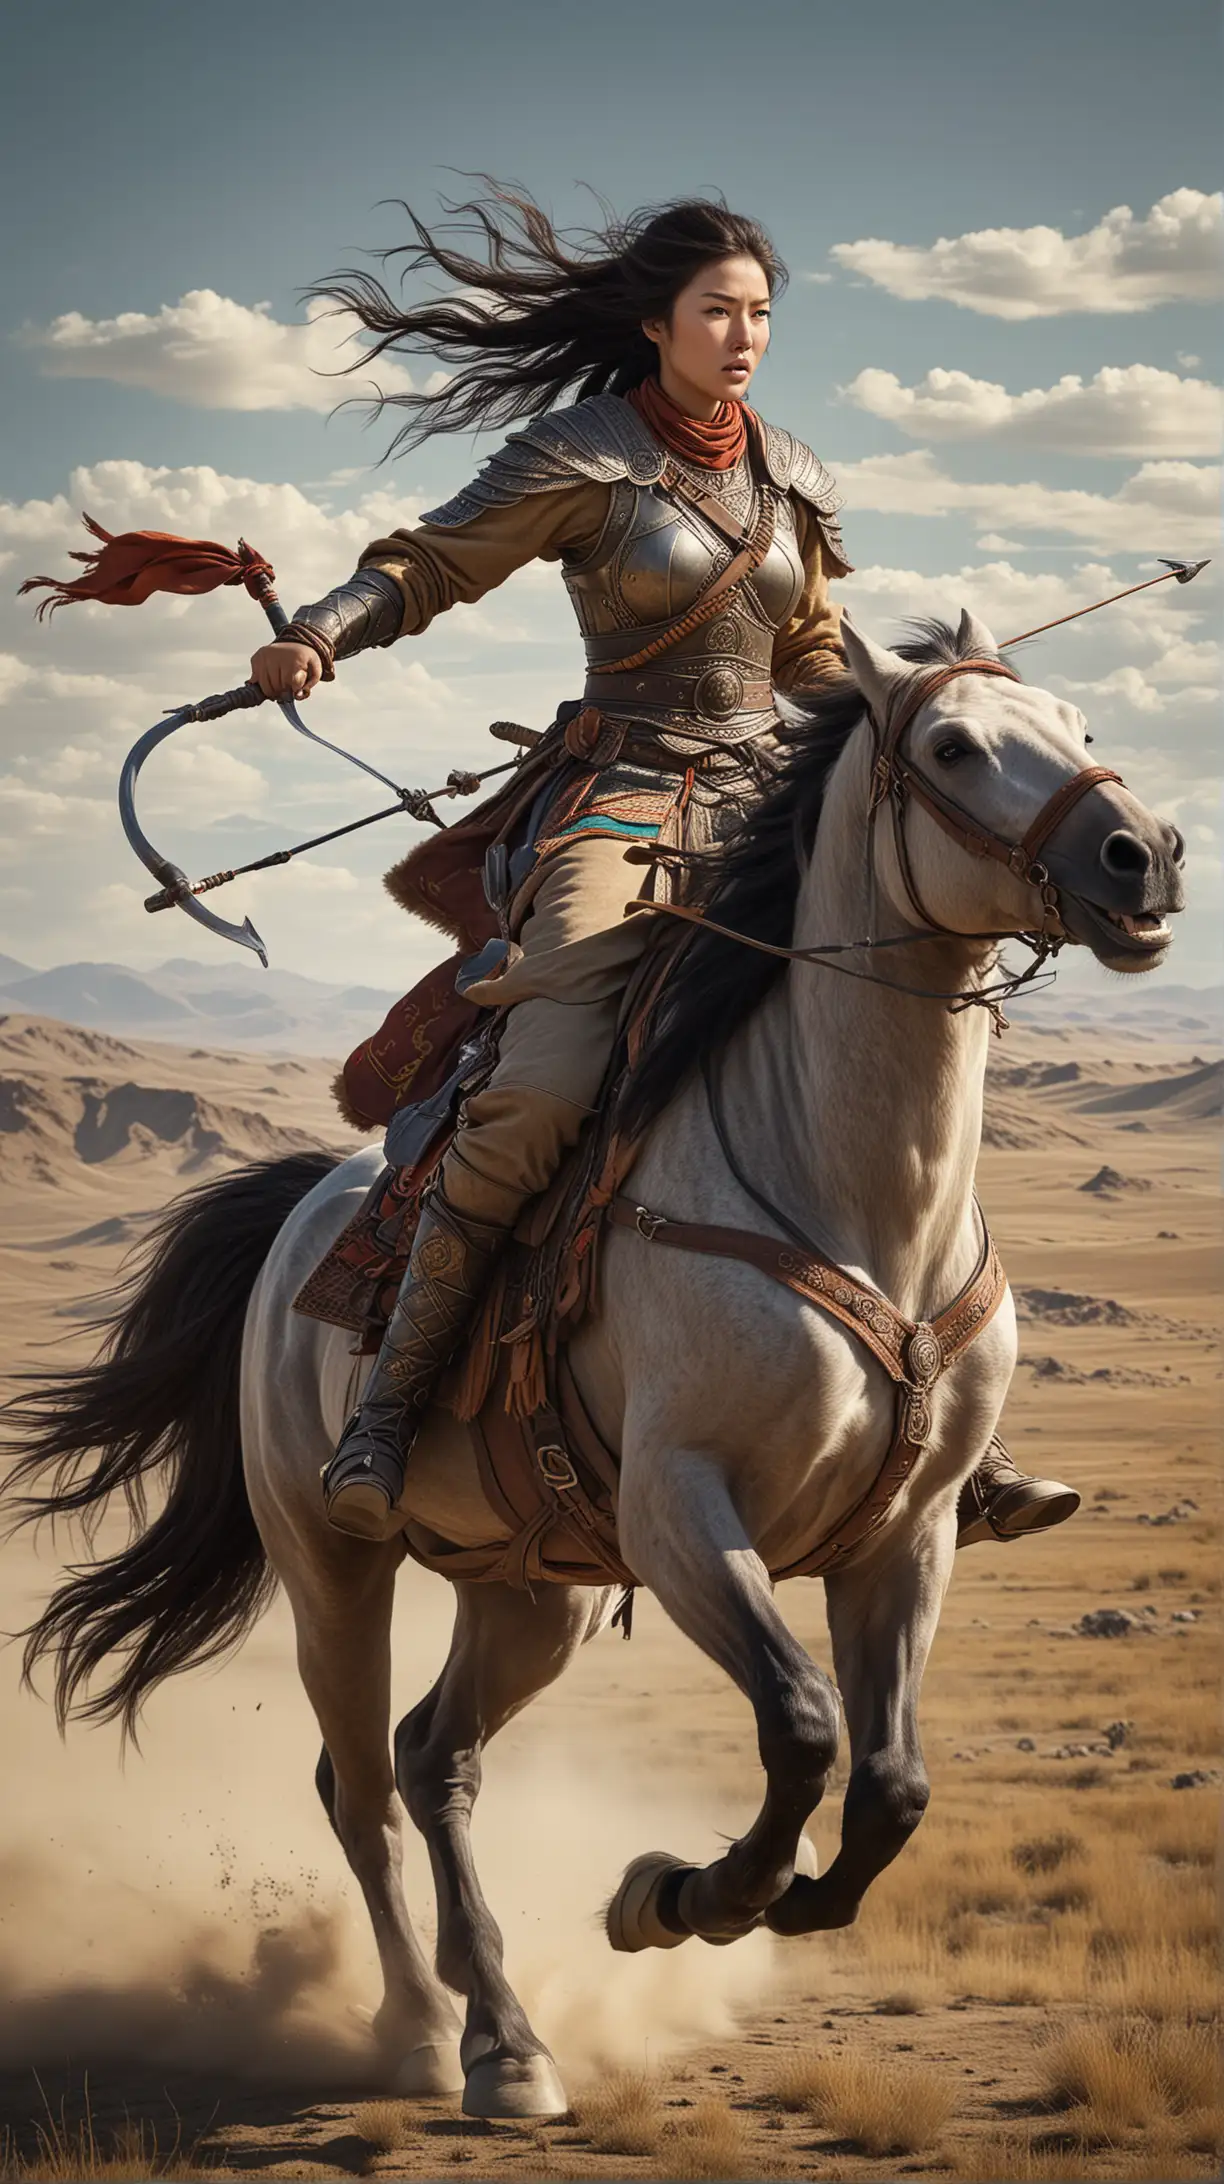 Mongol Empire Warrior Woman Riding Horse on Central Asian Steppes